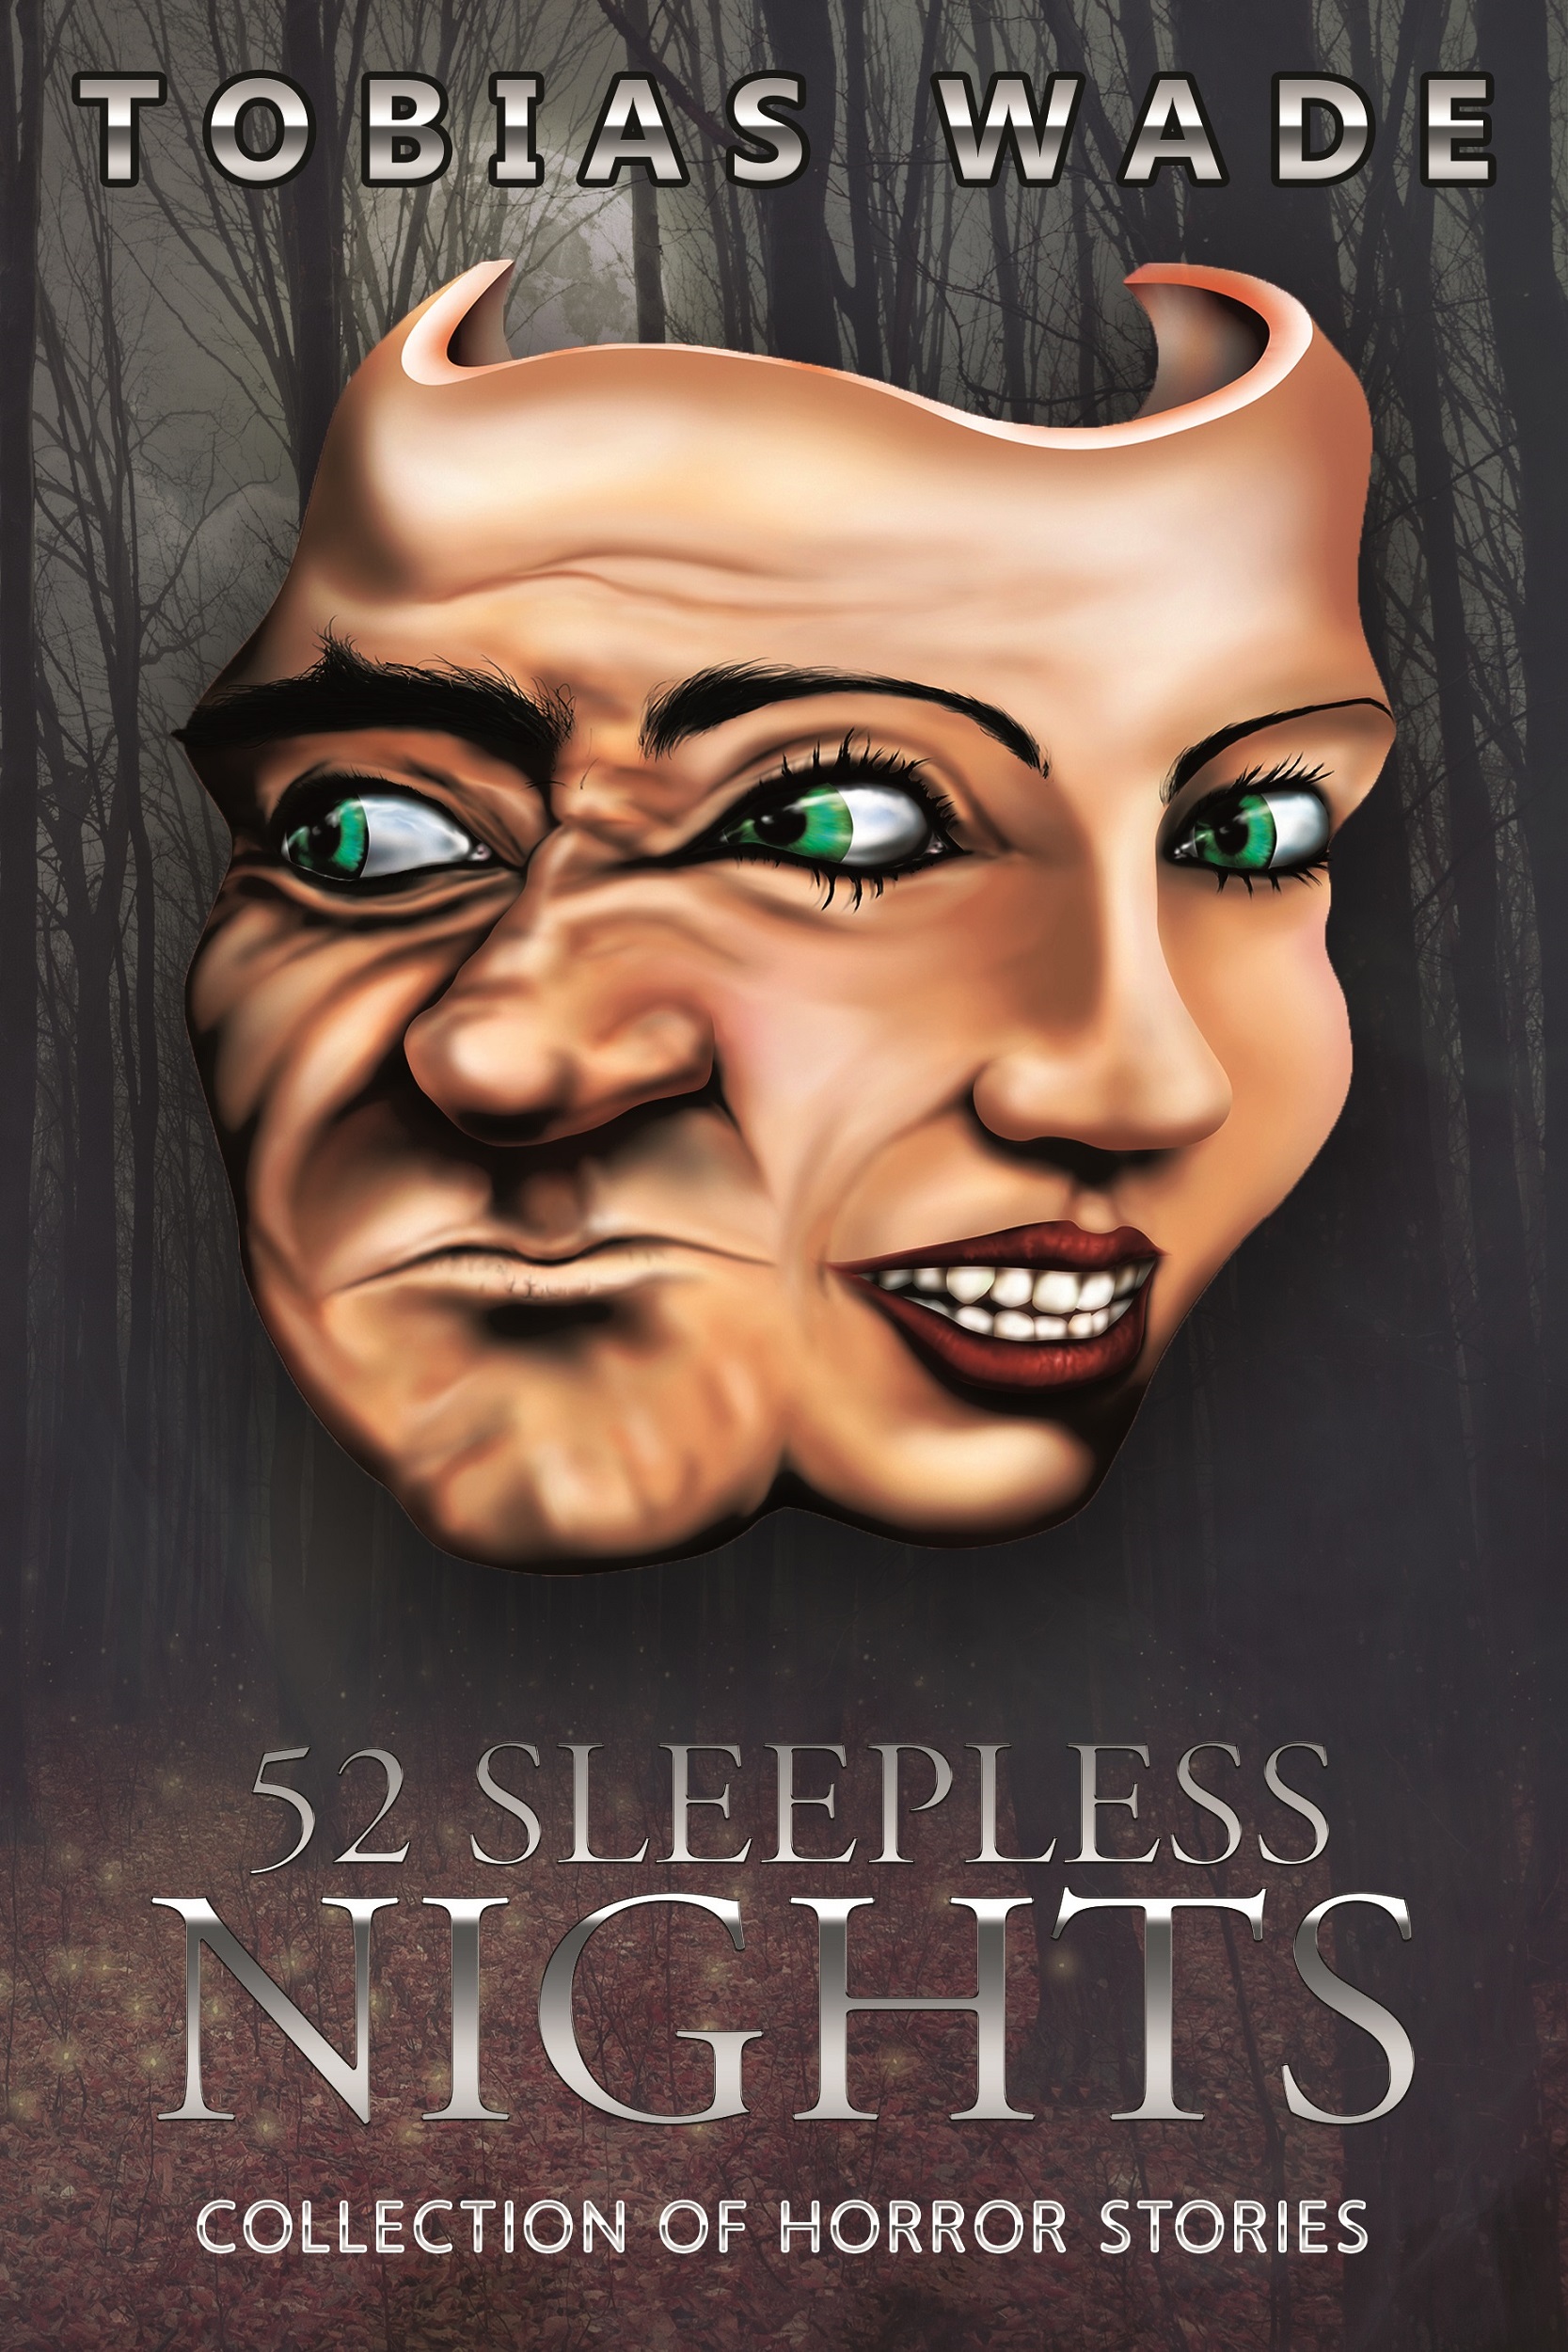 FREE: 52 Sleepless Nights: Thriller, suspense, mystery, and horror short stories by Tobias Wade